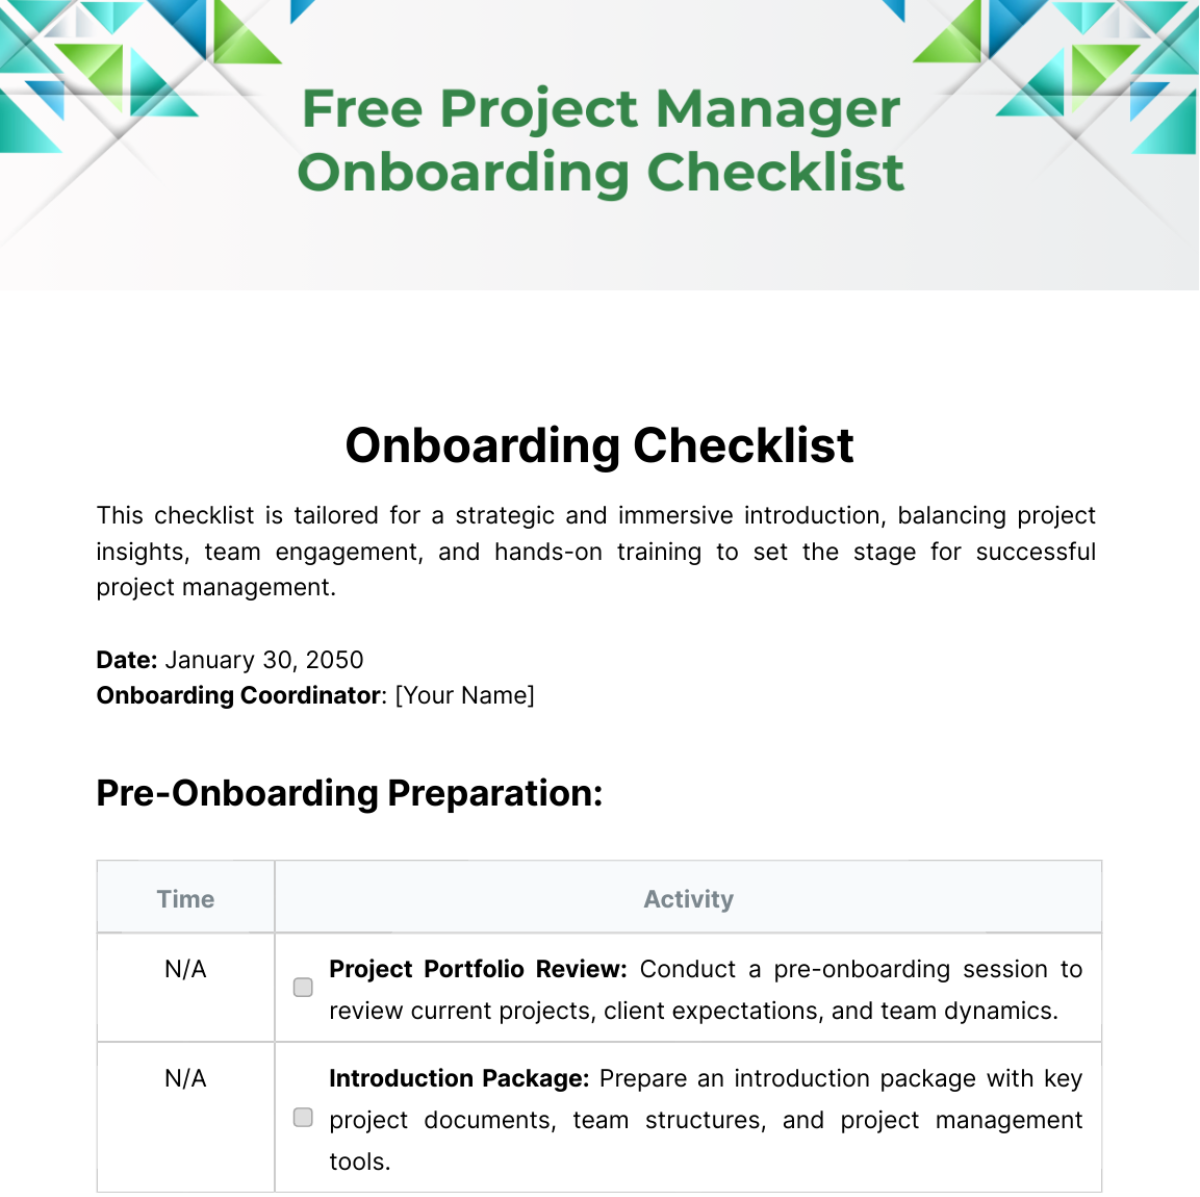 Free Project Manager Onboarding Checklist Template